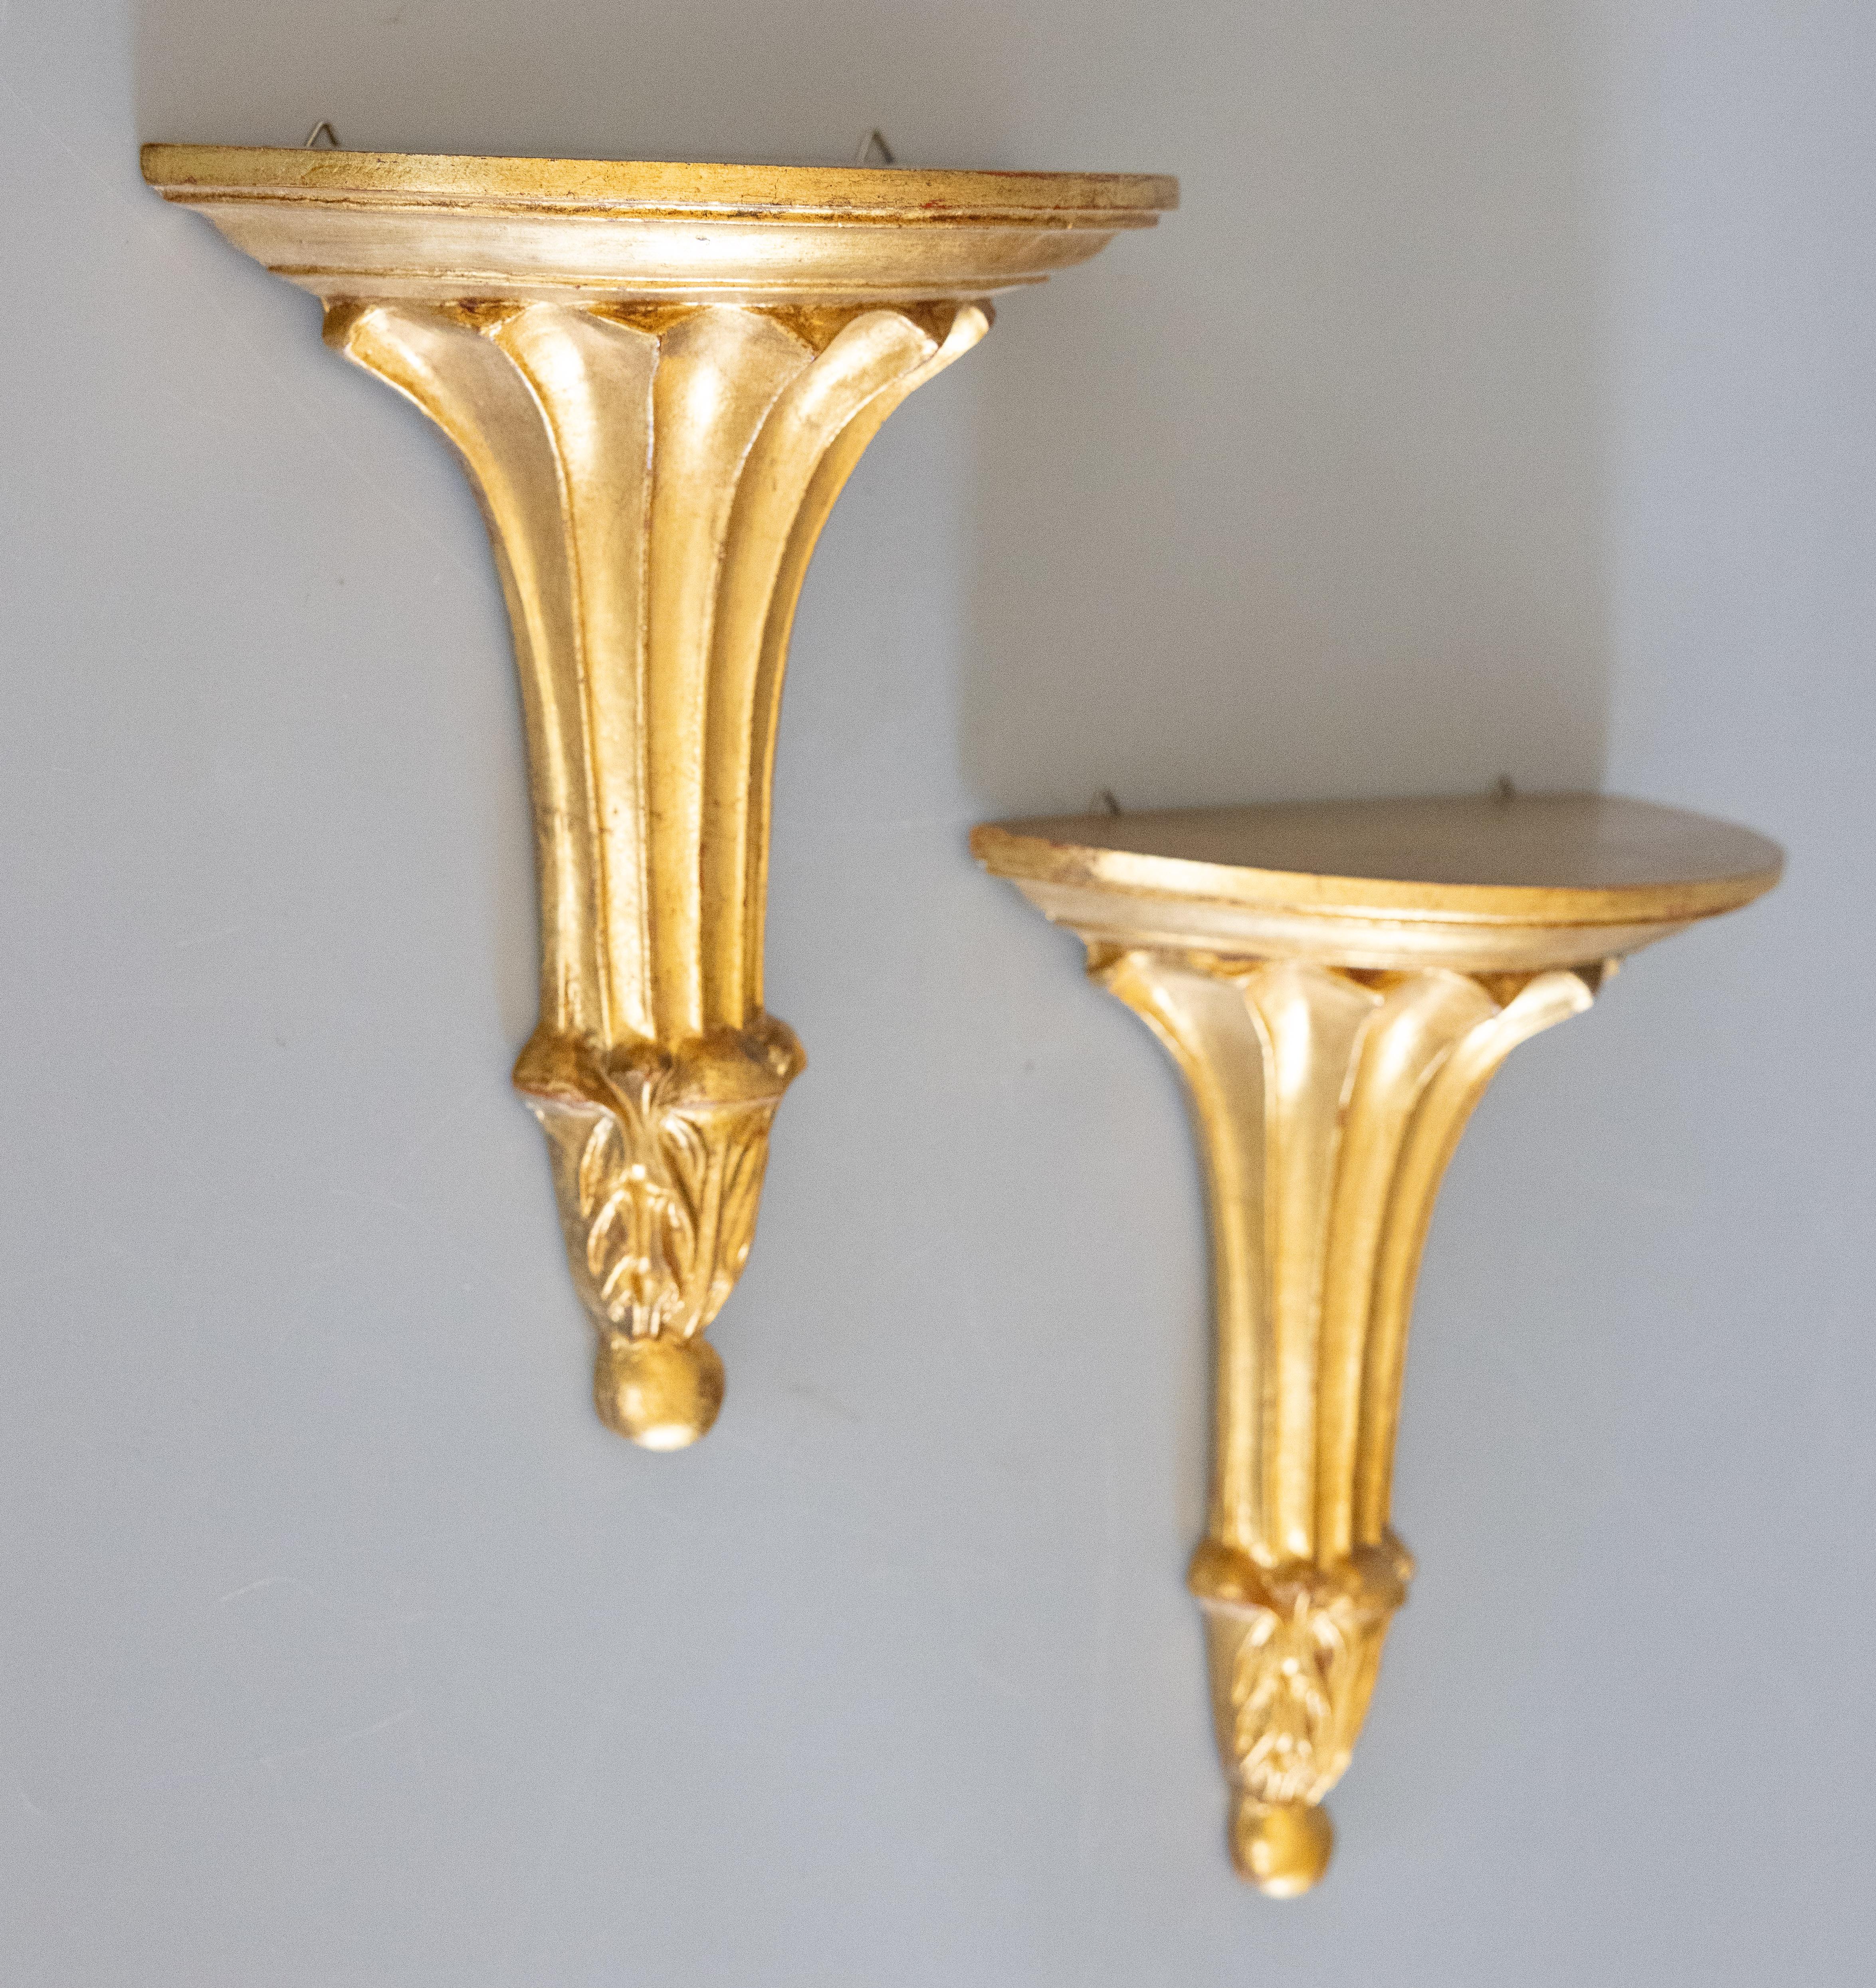 Pair of Mid-20th Century Italian Neoclassical Giltwood Wall Brackets Shelves 1